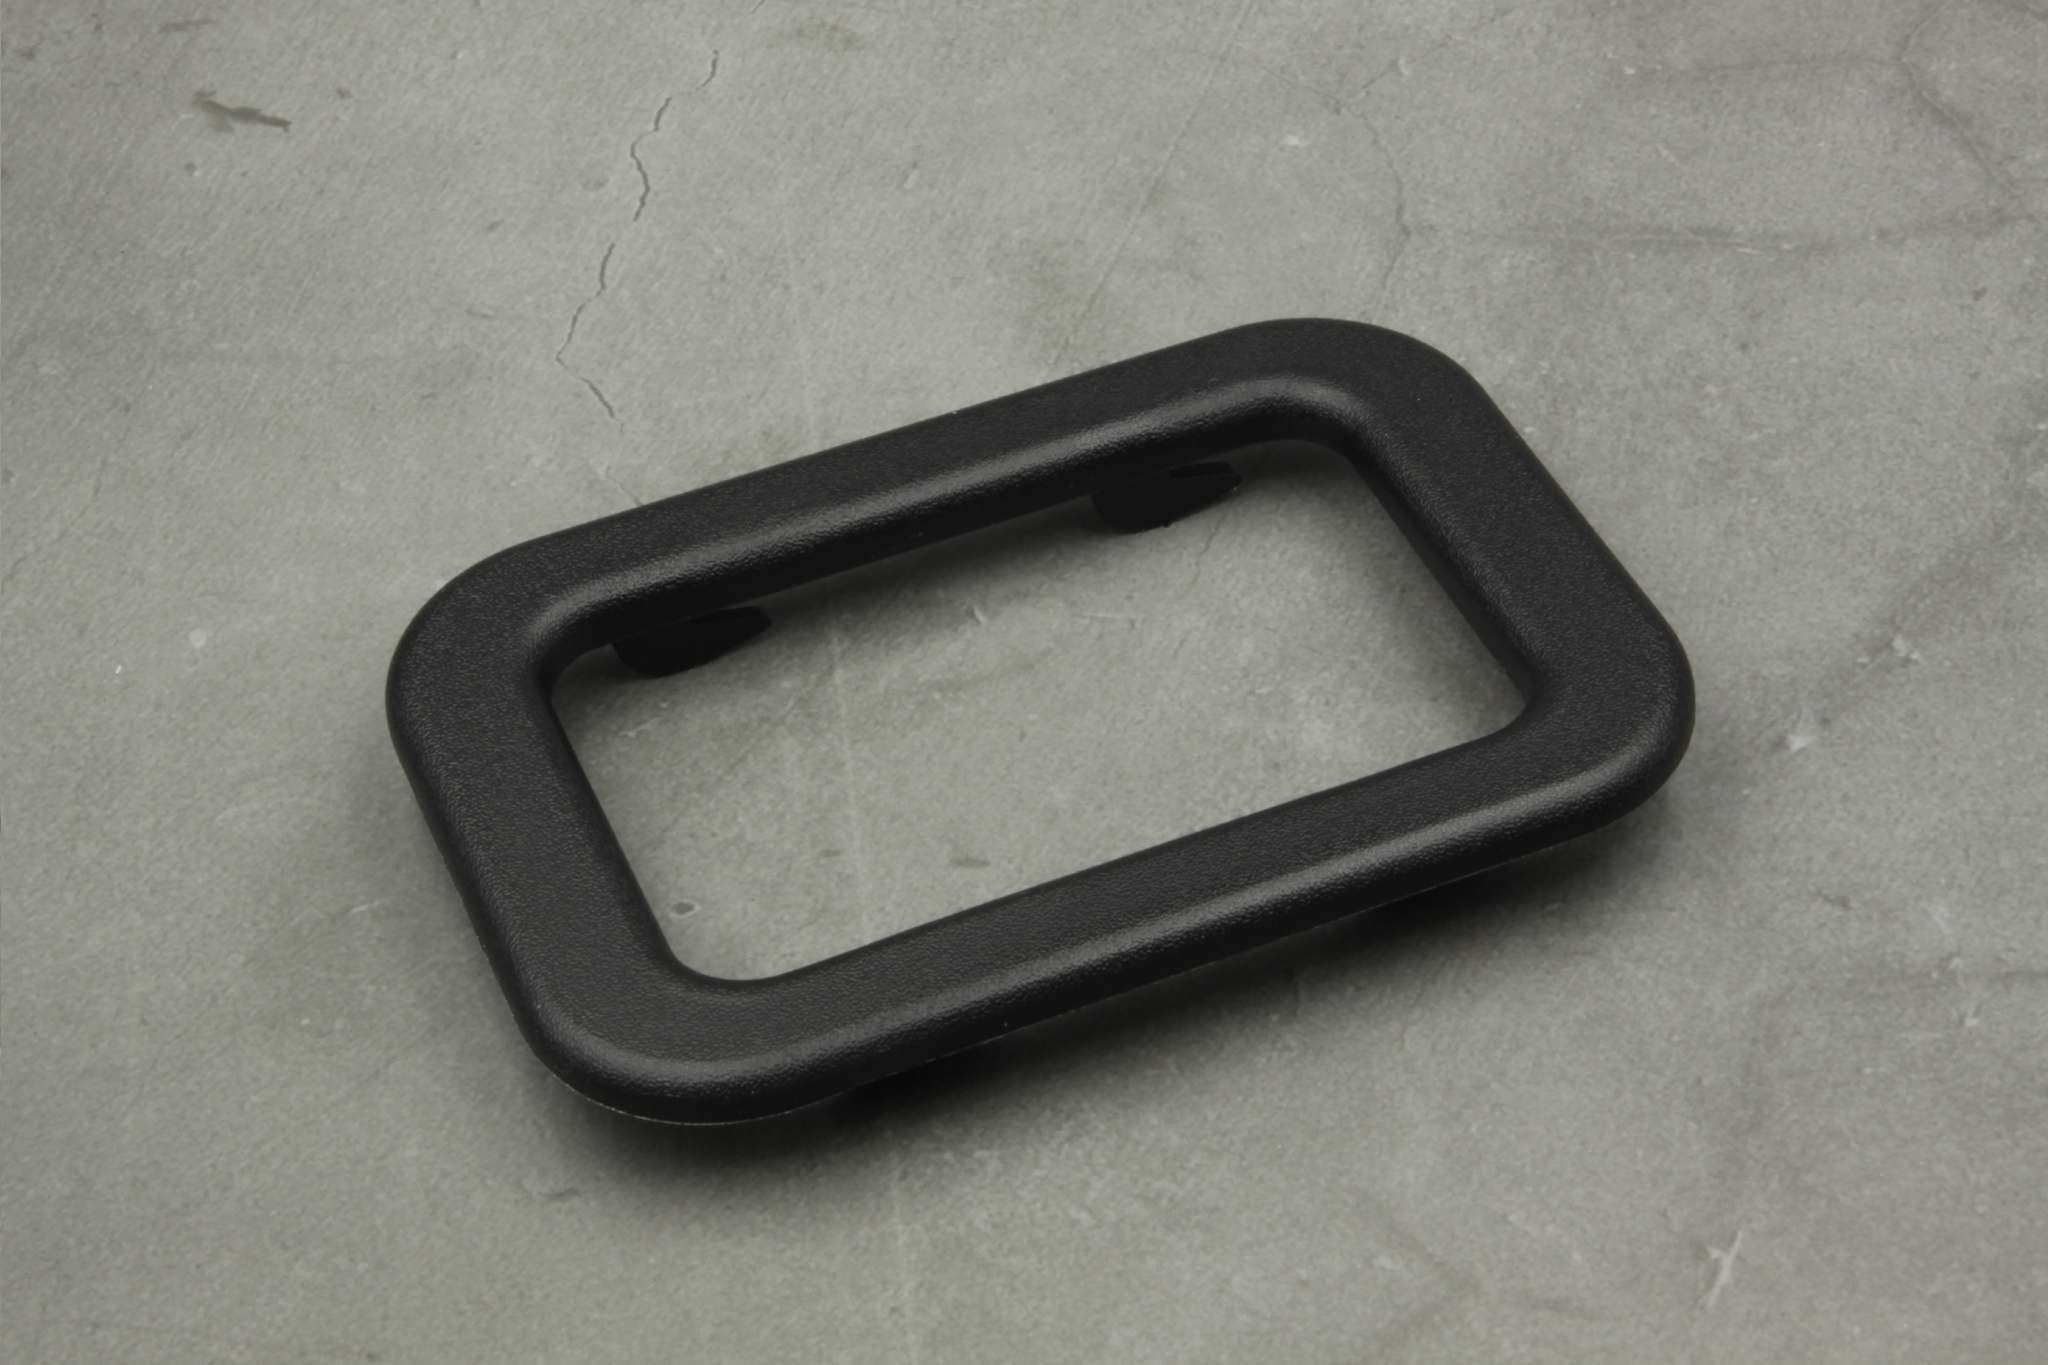 Interior Handle Covers - 51211876043